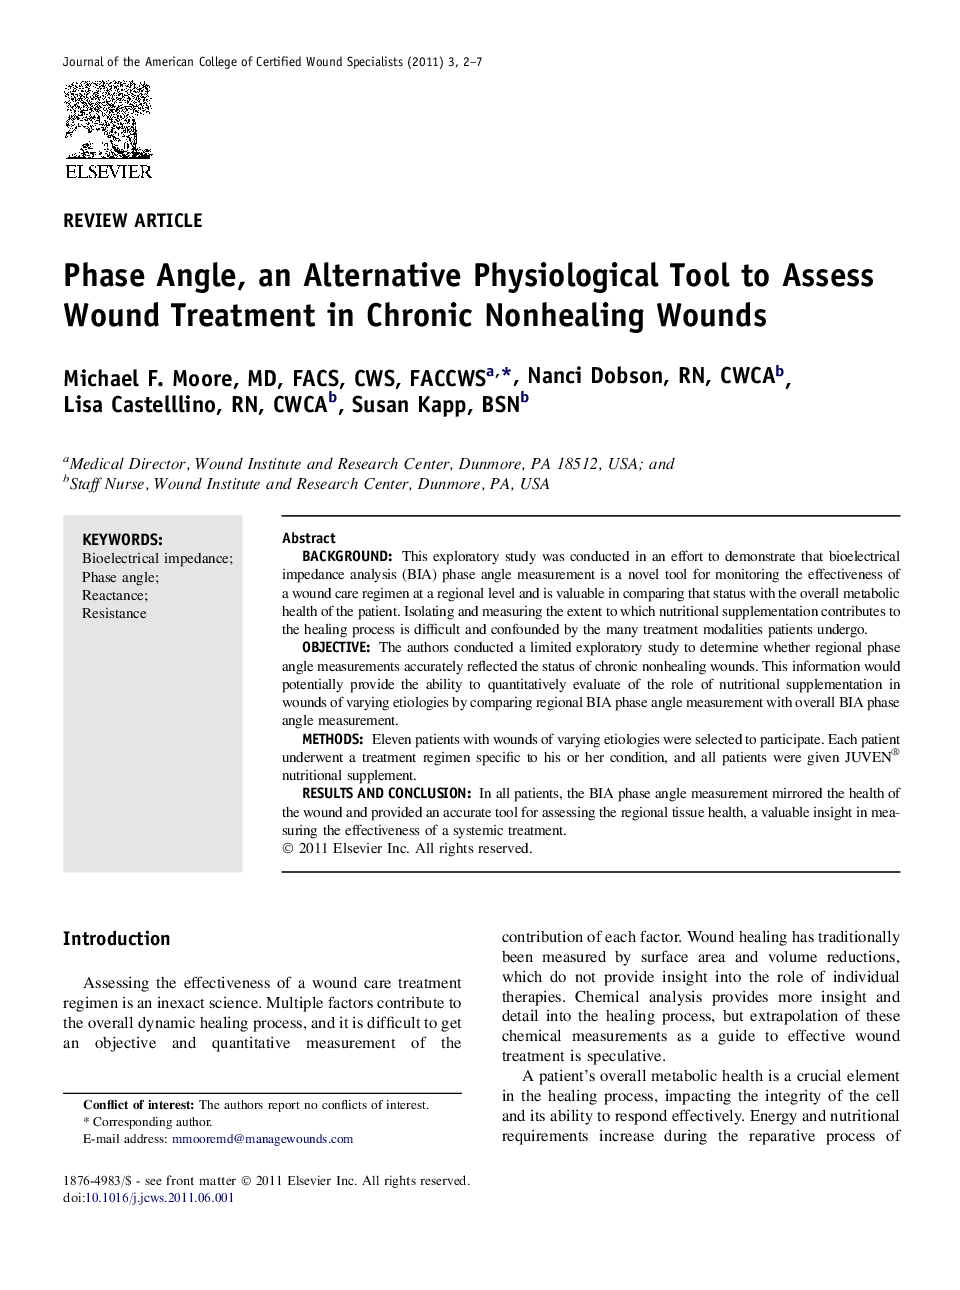 Phase Angle, an Alternative Physiological Tool to Assess Wound Treatment in Chronic Nonhealing Wounds